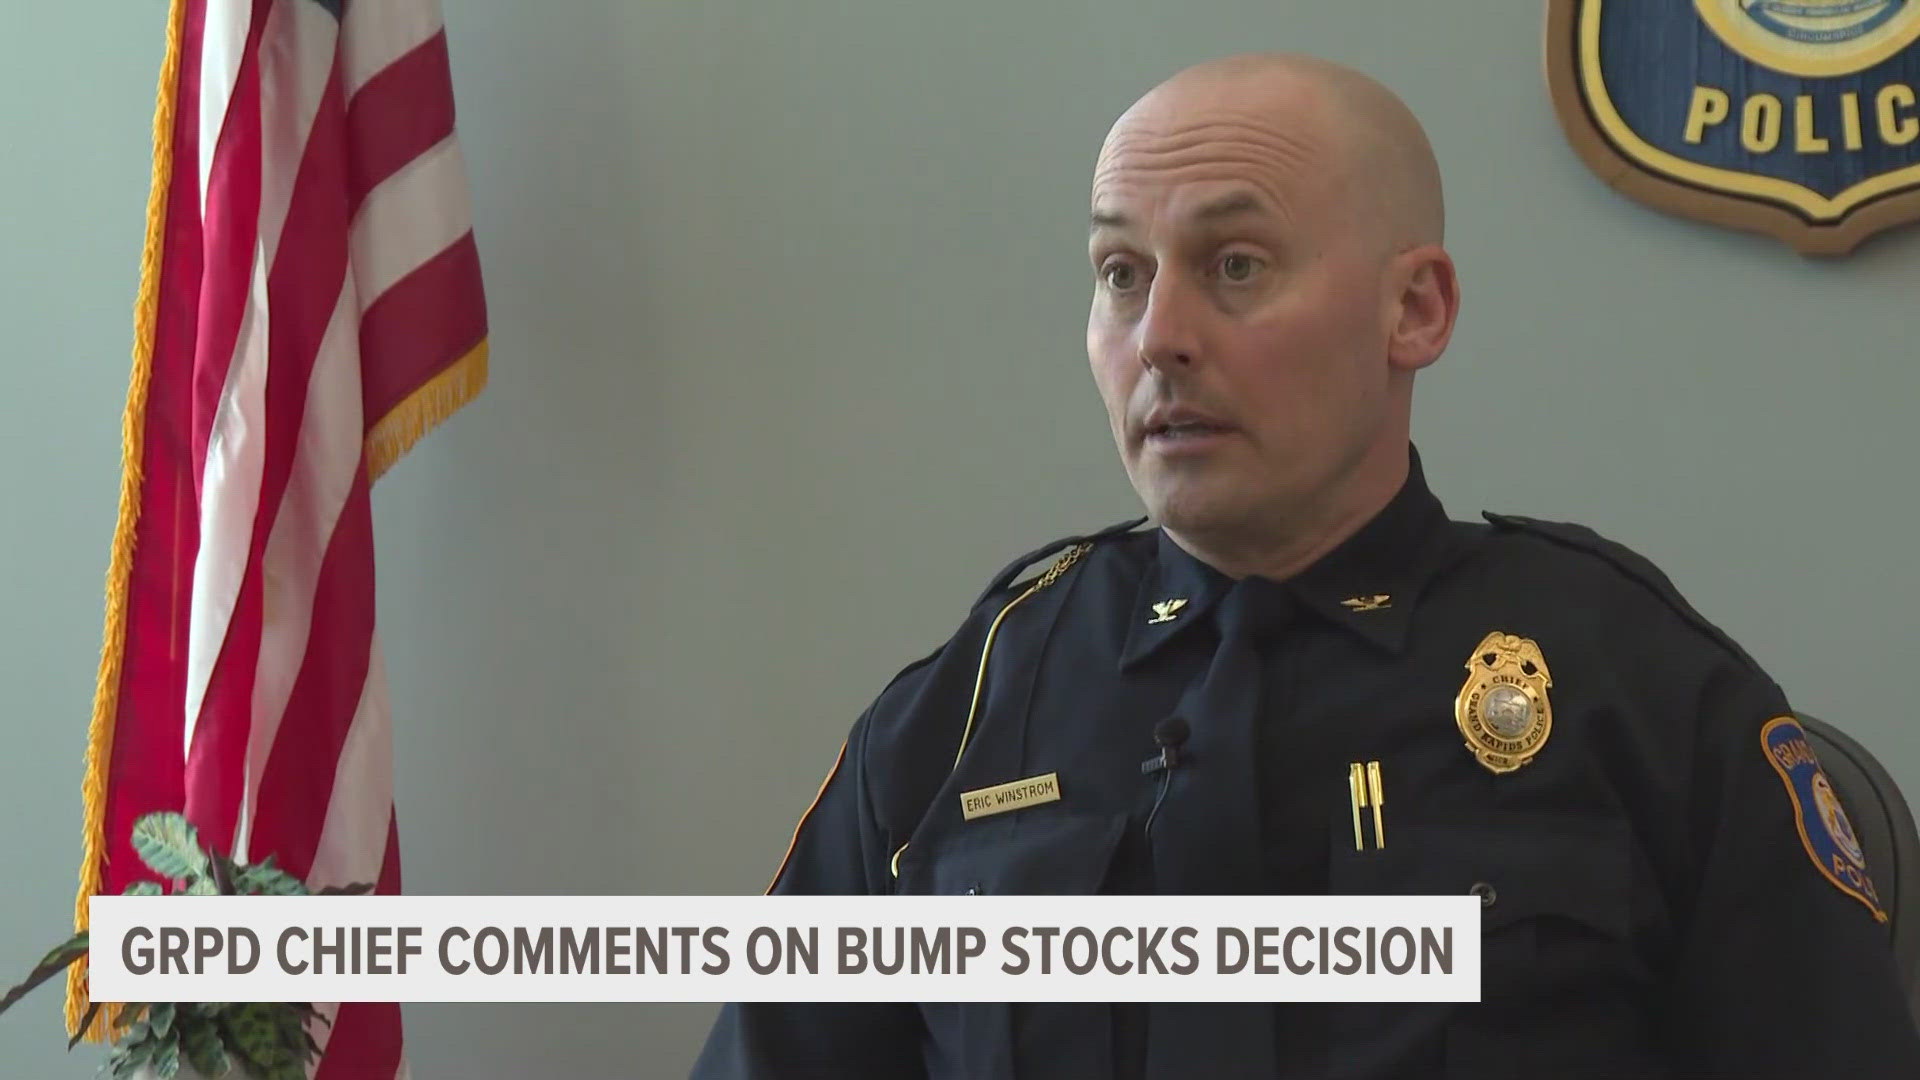 13 ON YOUR SIDE spoke to Grand Rapids Police Chief Eric Winstrom a few hours after the ruling.